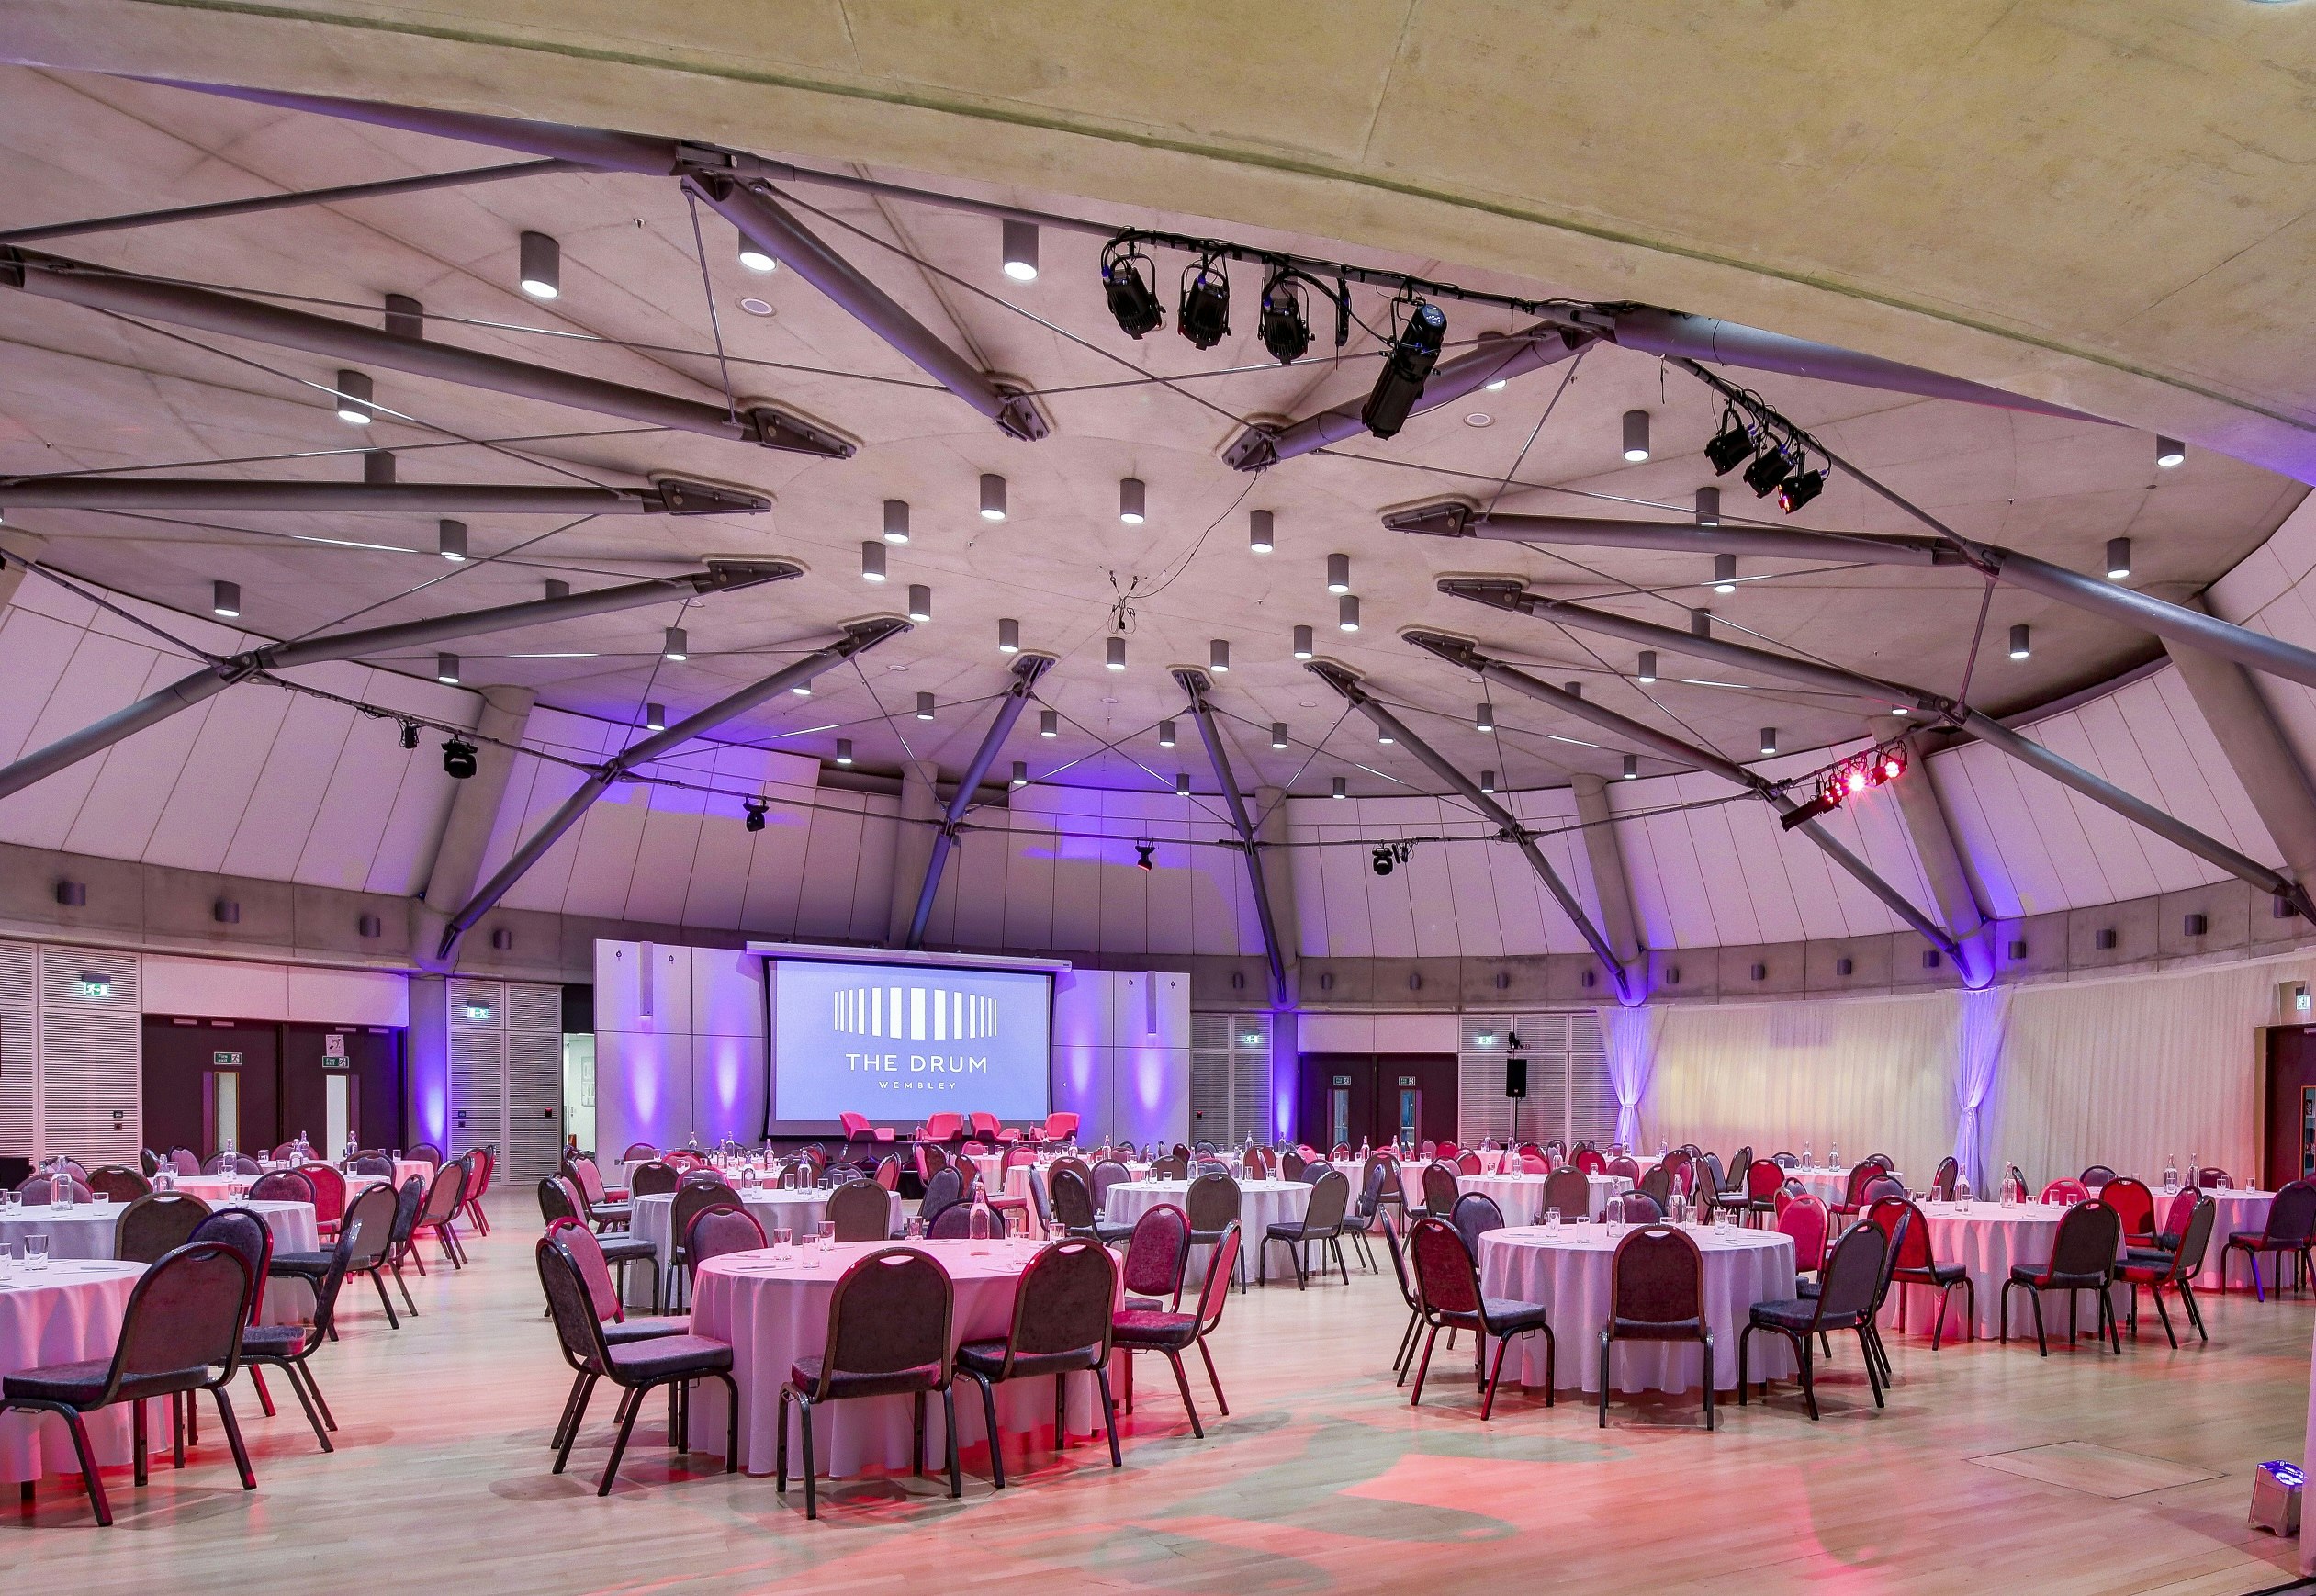 The Drum at Wembley - The Grand Hall image 9